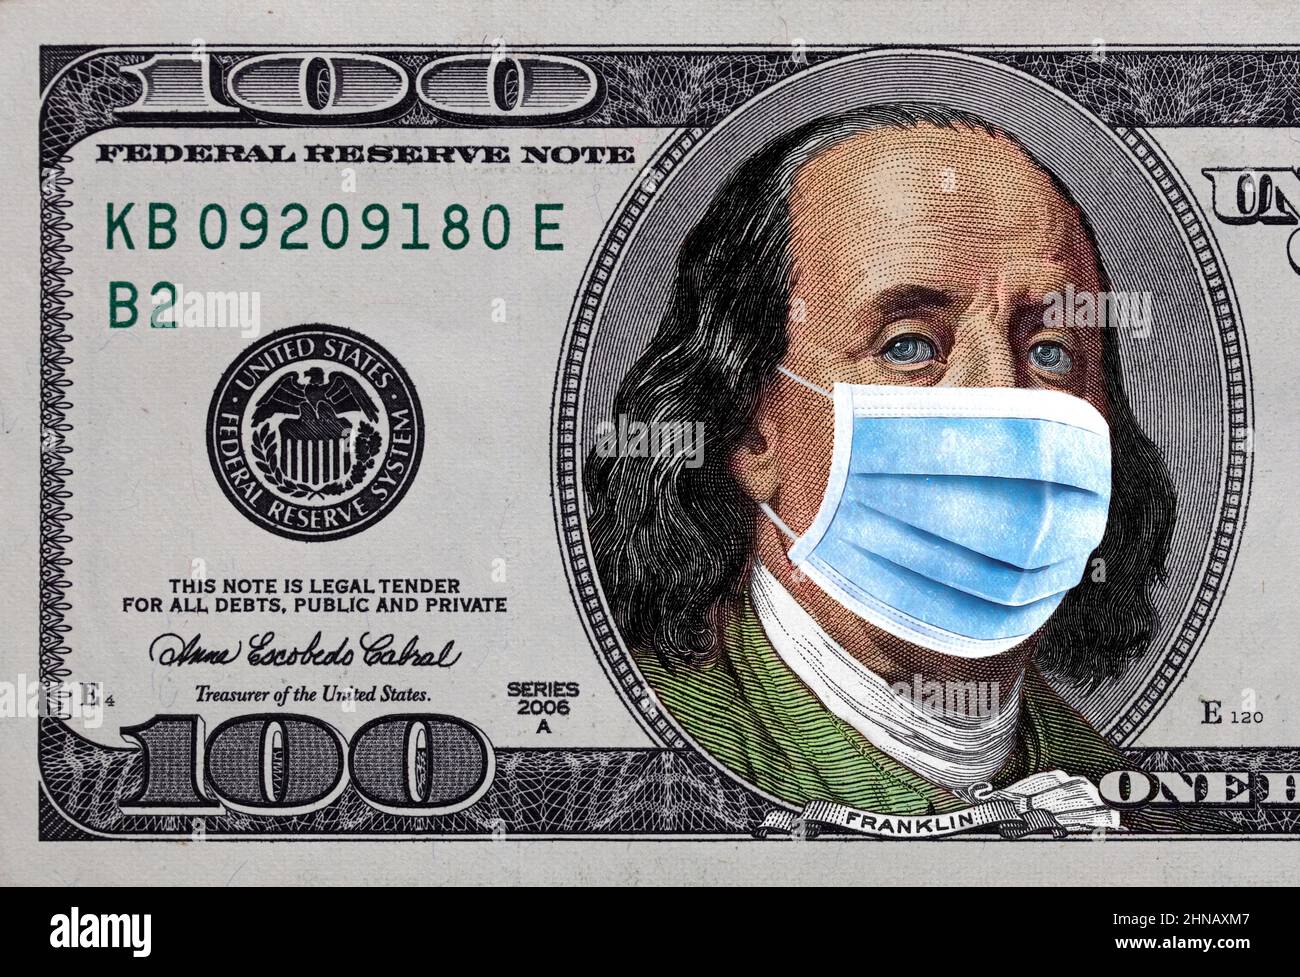 Benjamin Franklin With Surgical Mask On Old Colorized 100 Dollar Banknote For Design Purpose